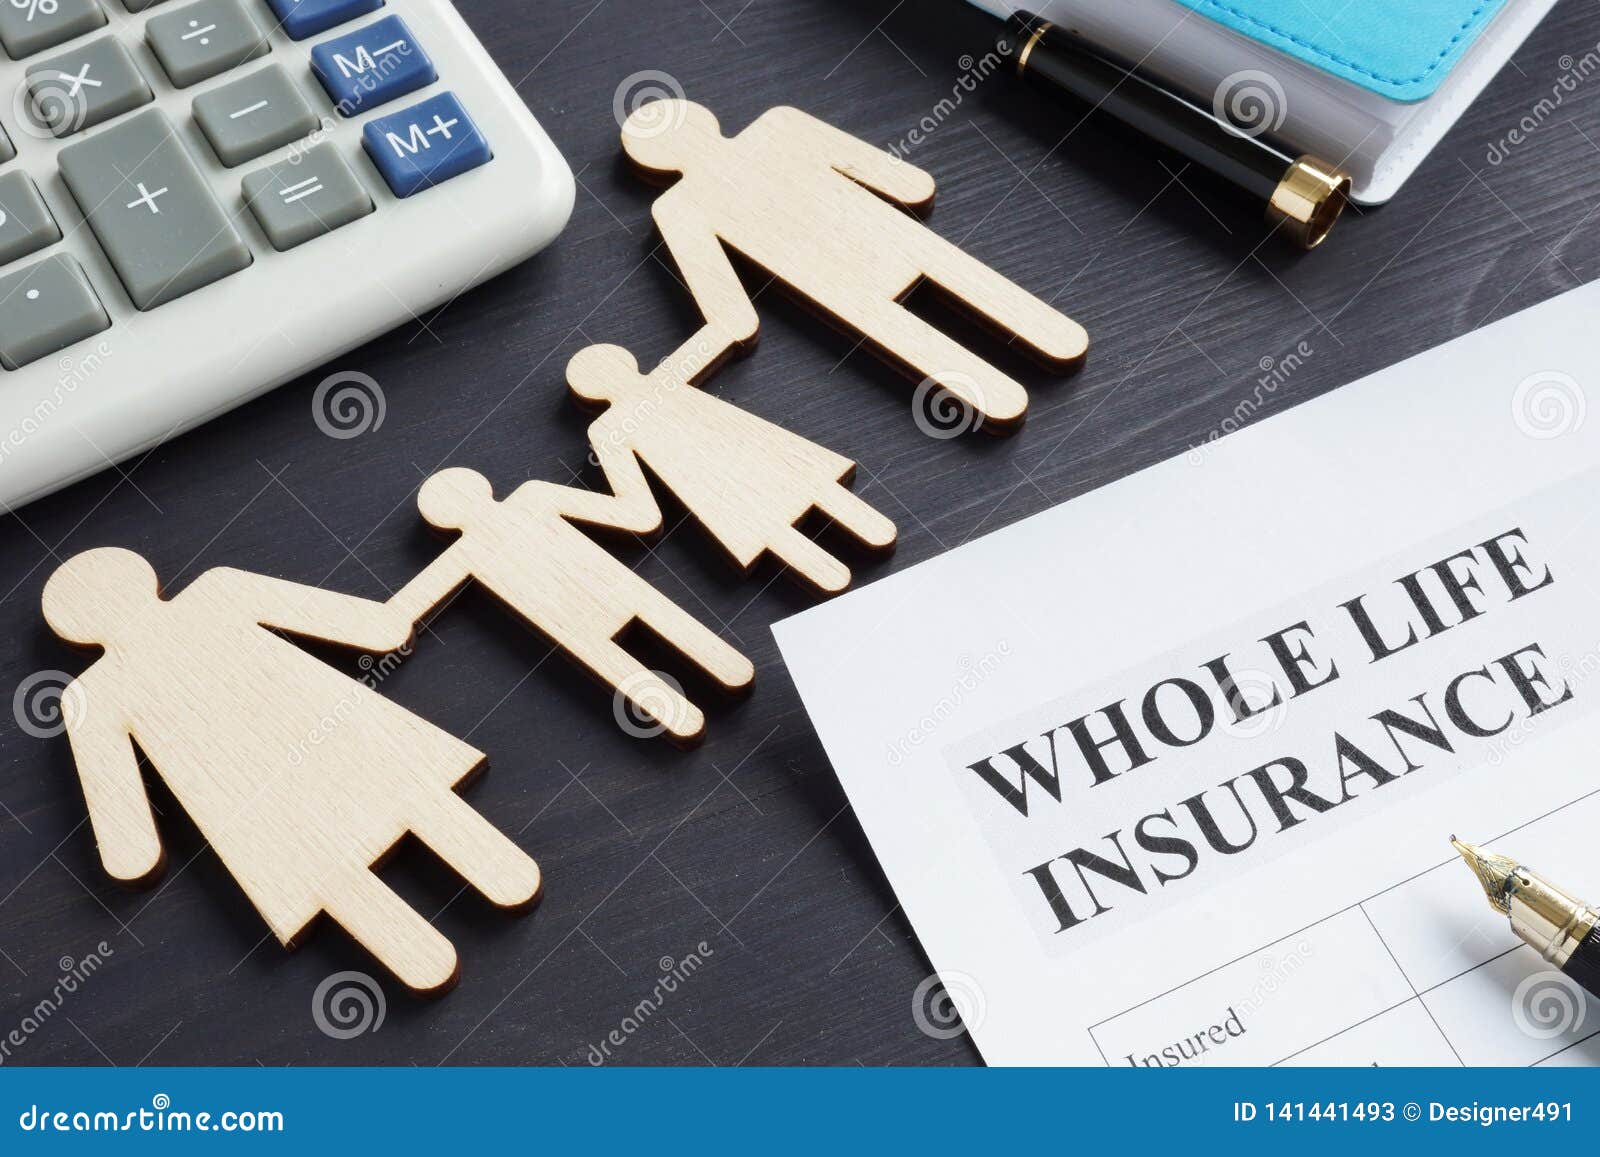 whole life insurance application form